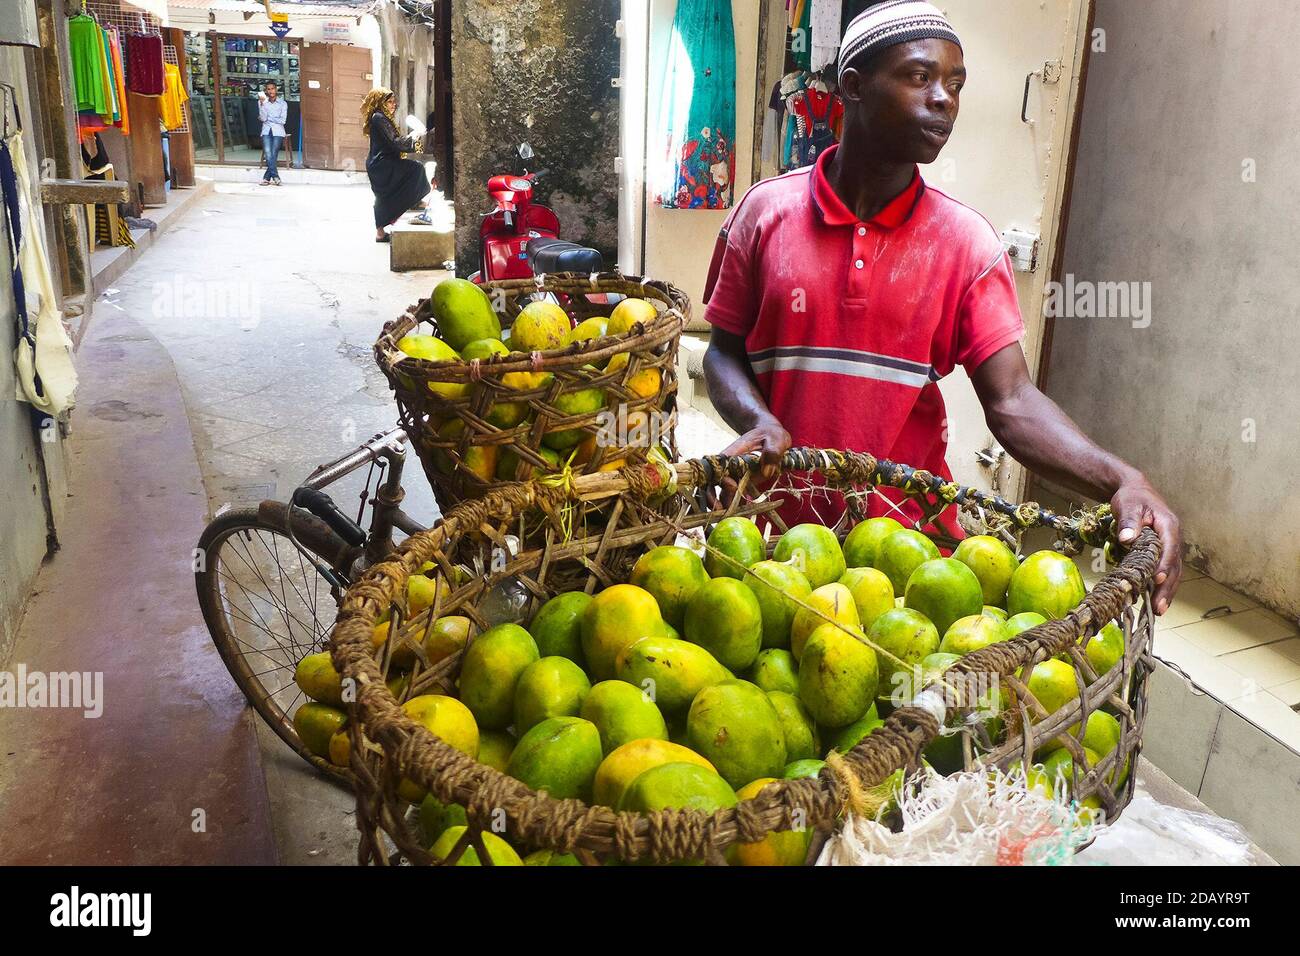 A traveling merchant sells fruit door-to-door in Stone Town, a historic section of Zanzibar town on the island of Zanzibar, which is part of Tanzania. Stock Photo